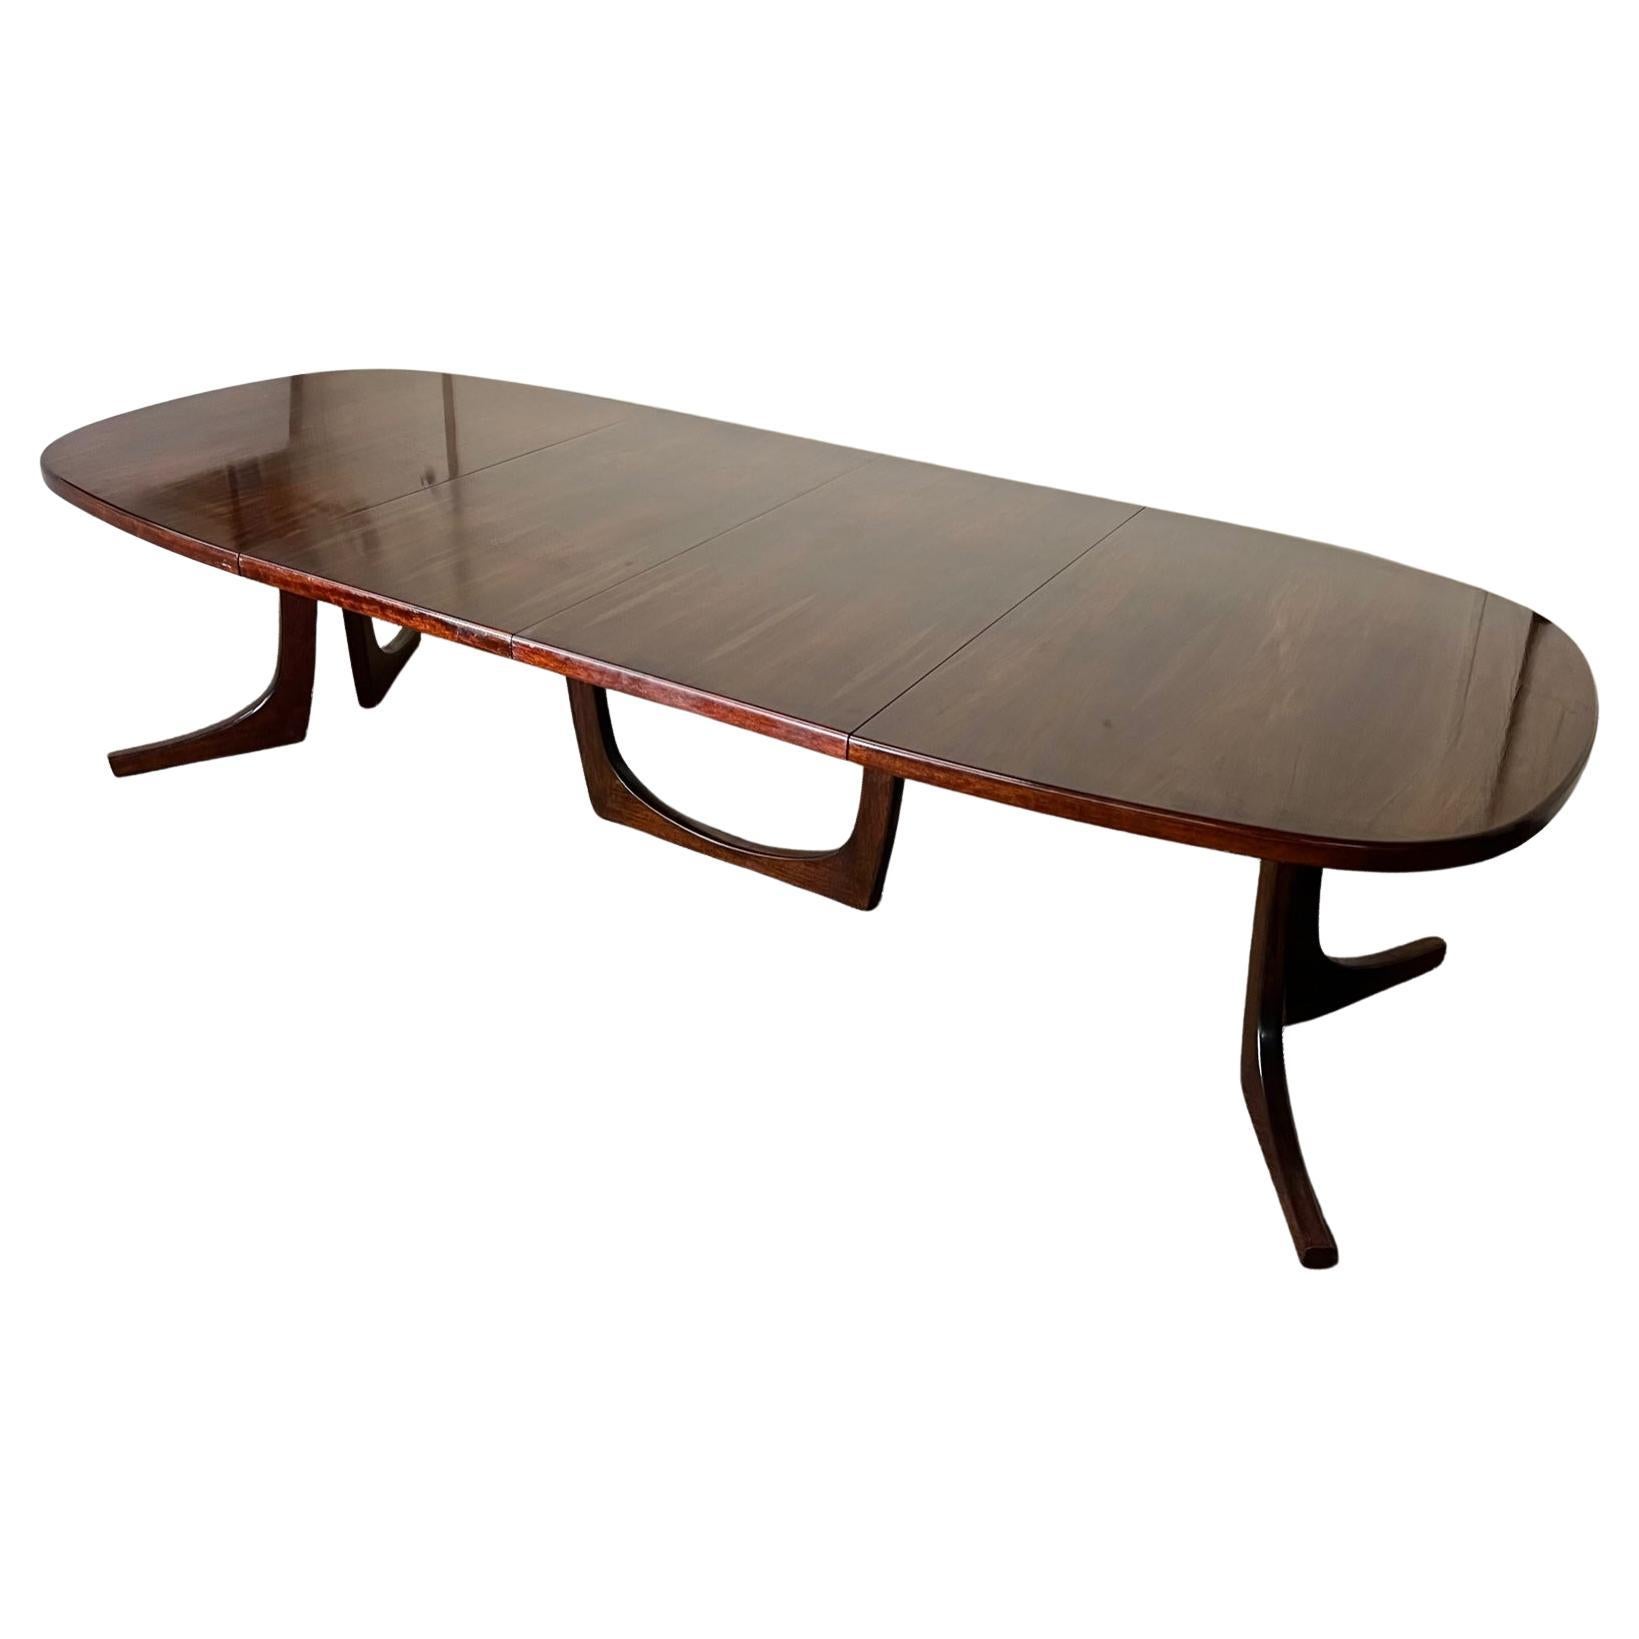 Midcentury Danish Modern Large Rosewood Dining Table with 2 Extension Leaves